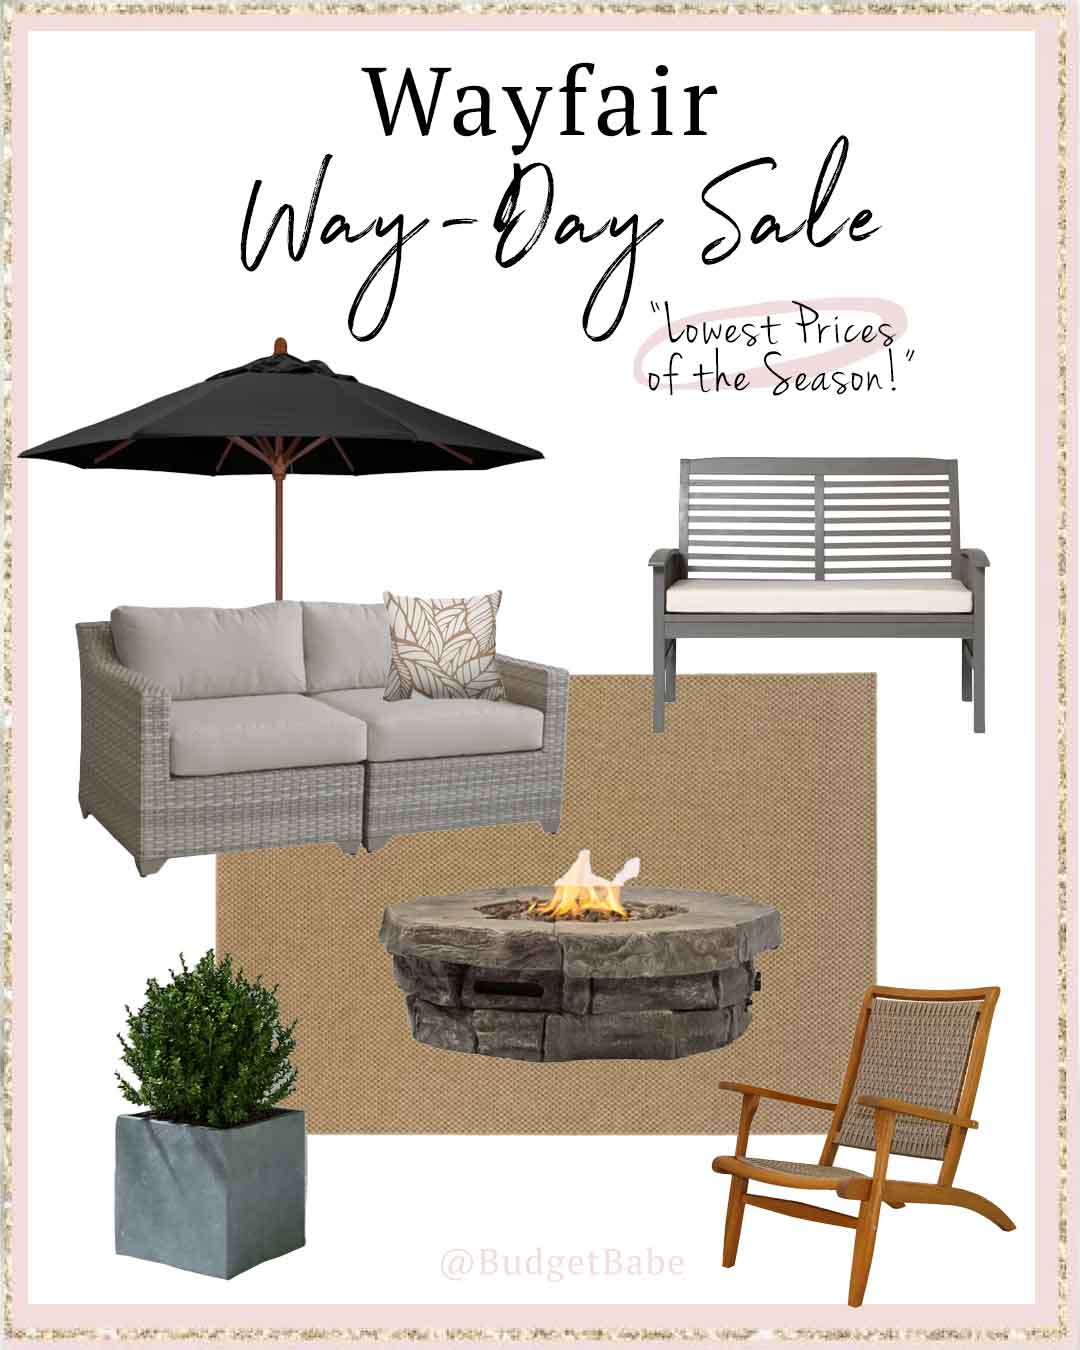 Wayfair's lowest prices of the season! Today only!